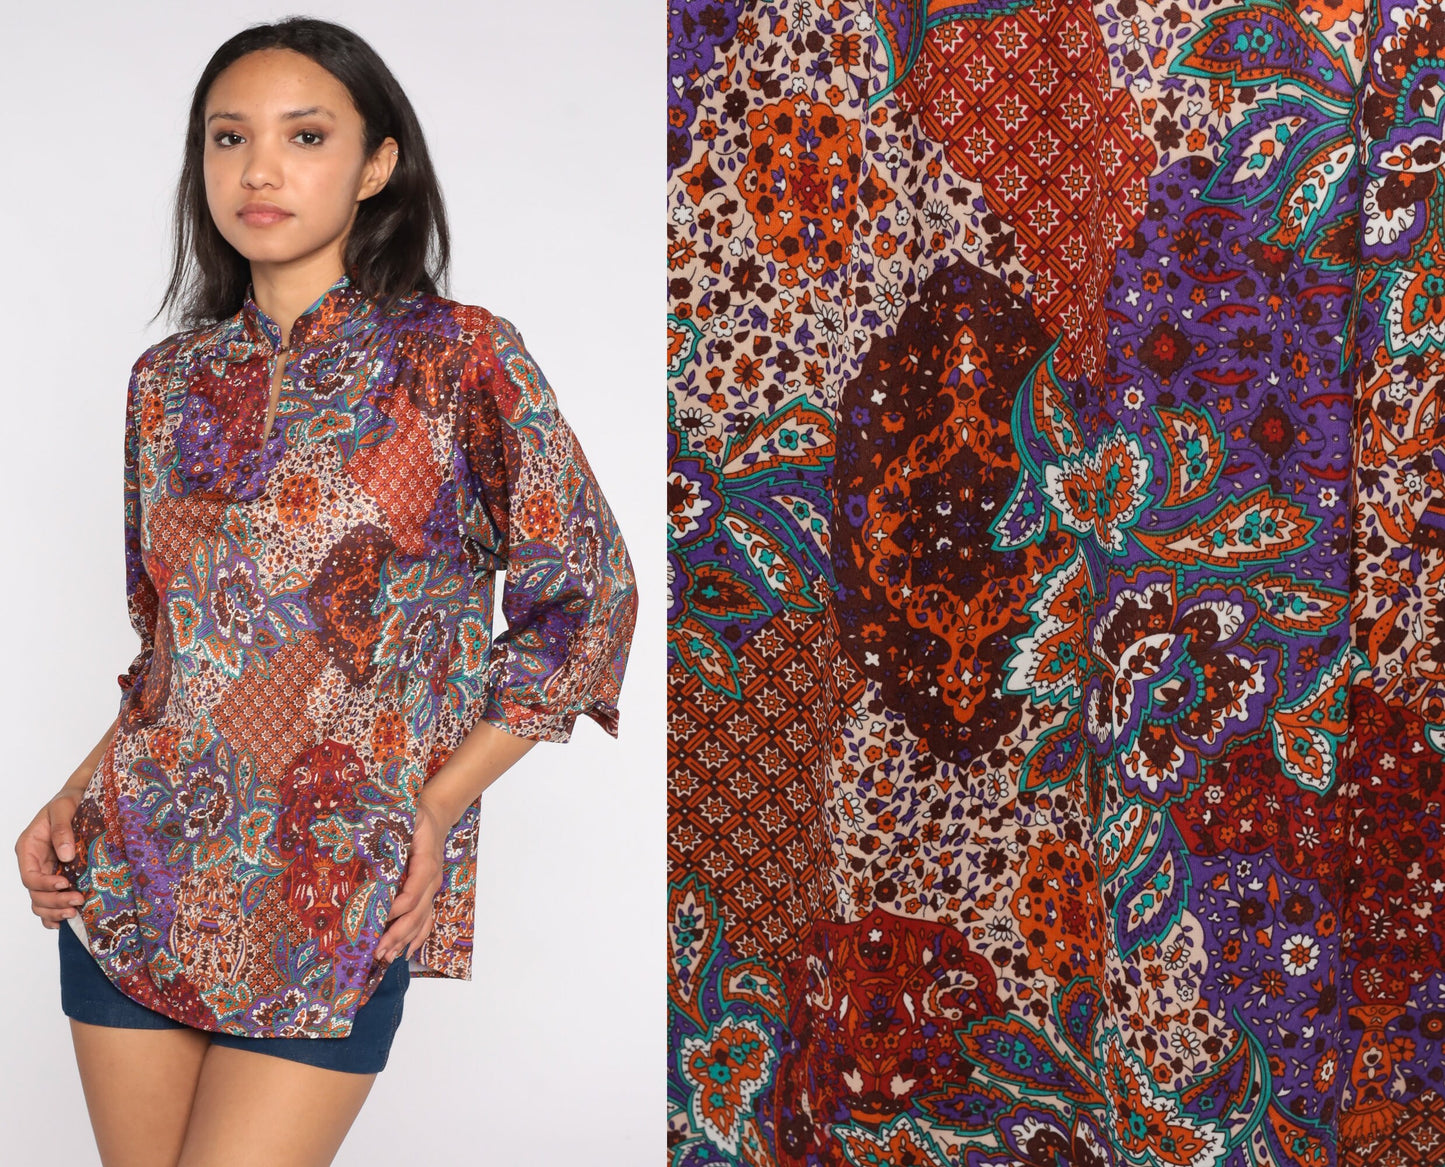 Patchwork Paisley Blouse 70s Keyhole High Neck Shirt 3/4 Sleeve Hippie Top Collar Boho Groovy Psychedelic Vintage 1970s Retro Bohemian Large